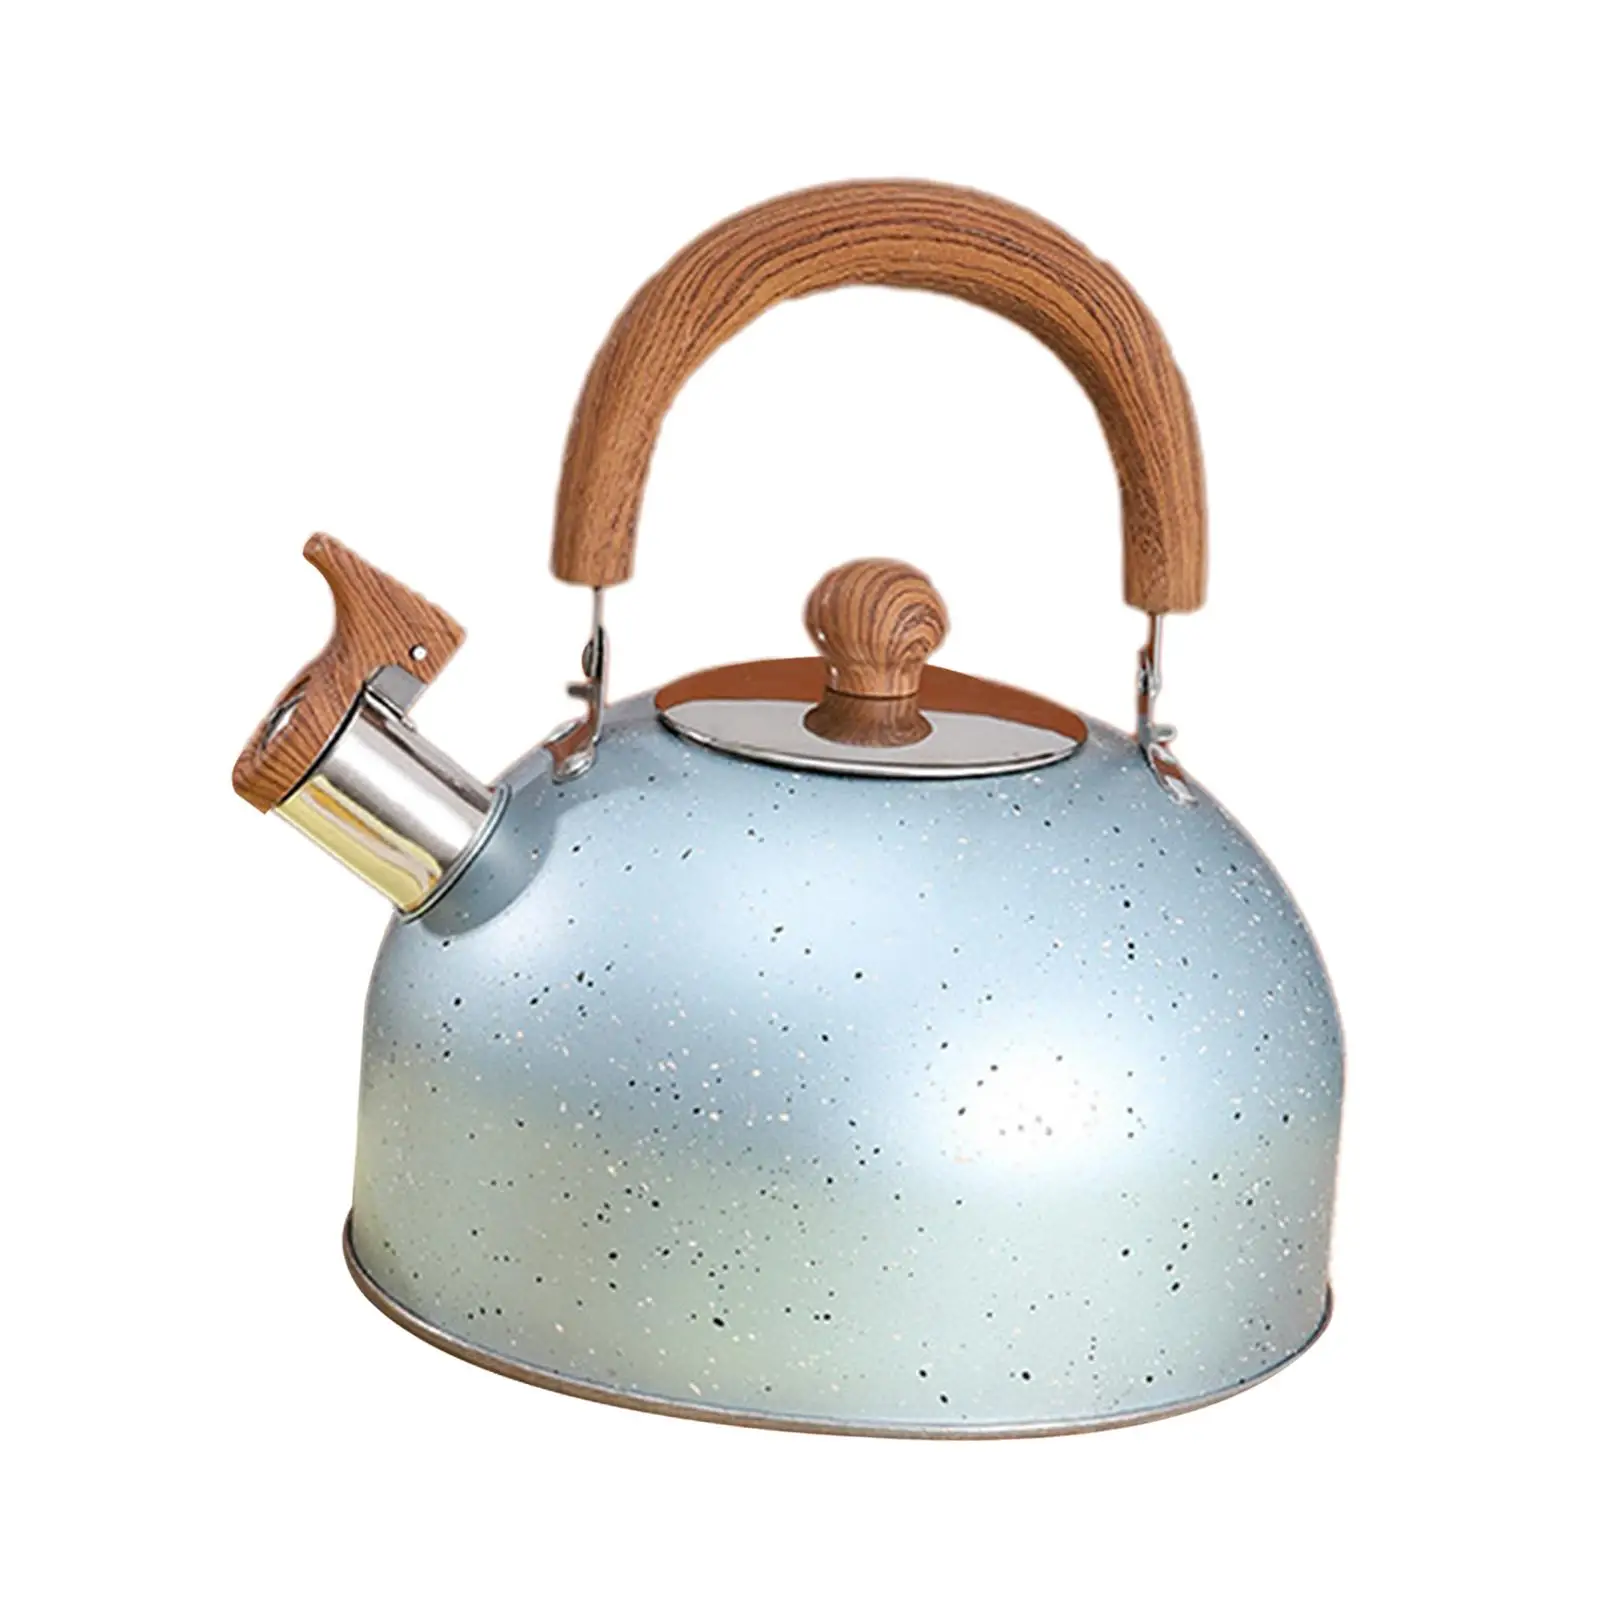 https://ae01.alicdn.com/kf/S7a4a13ac37314be09e7f9e874354430d6/Stovetop-Water-Kettle-Wooden-Handle-Coffee-Kettle-Teapot-Kitchenware-Cookware-4L-Teakettle-for-Boiling-Water-Induction.jpg